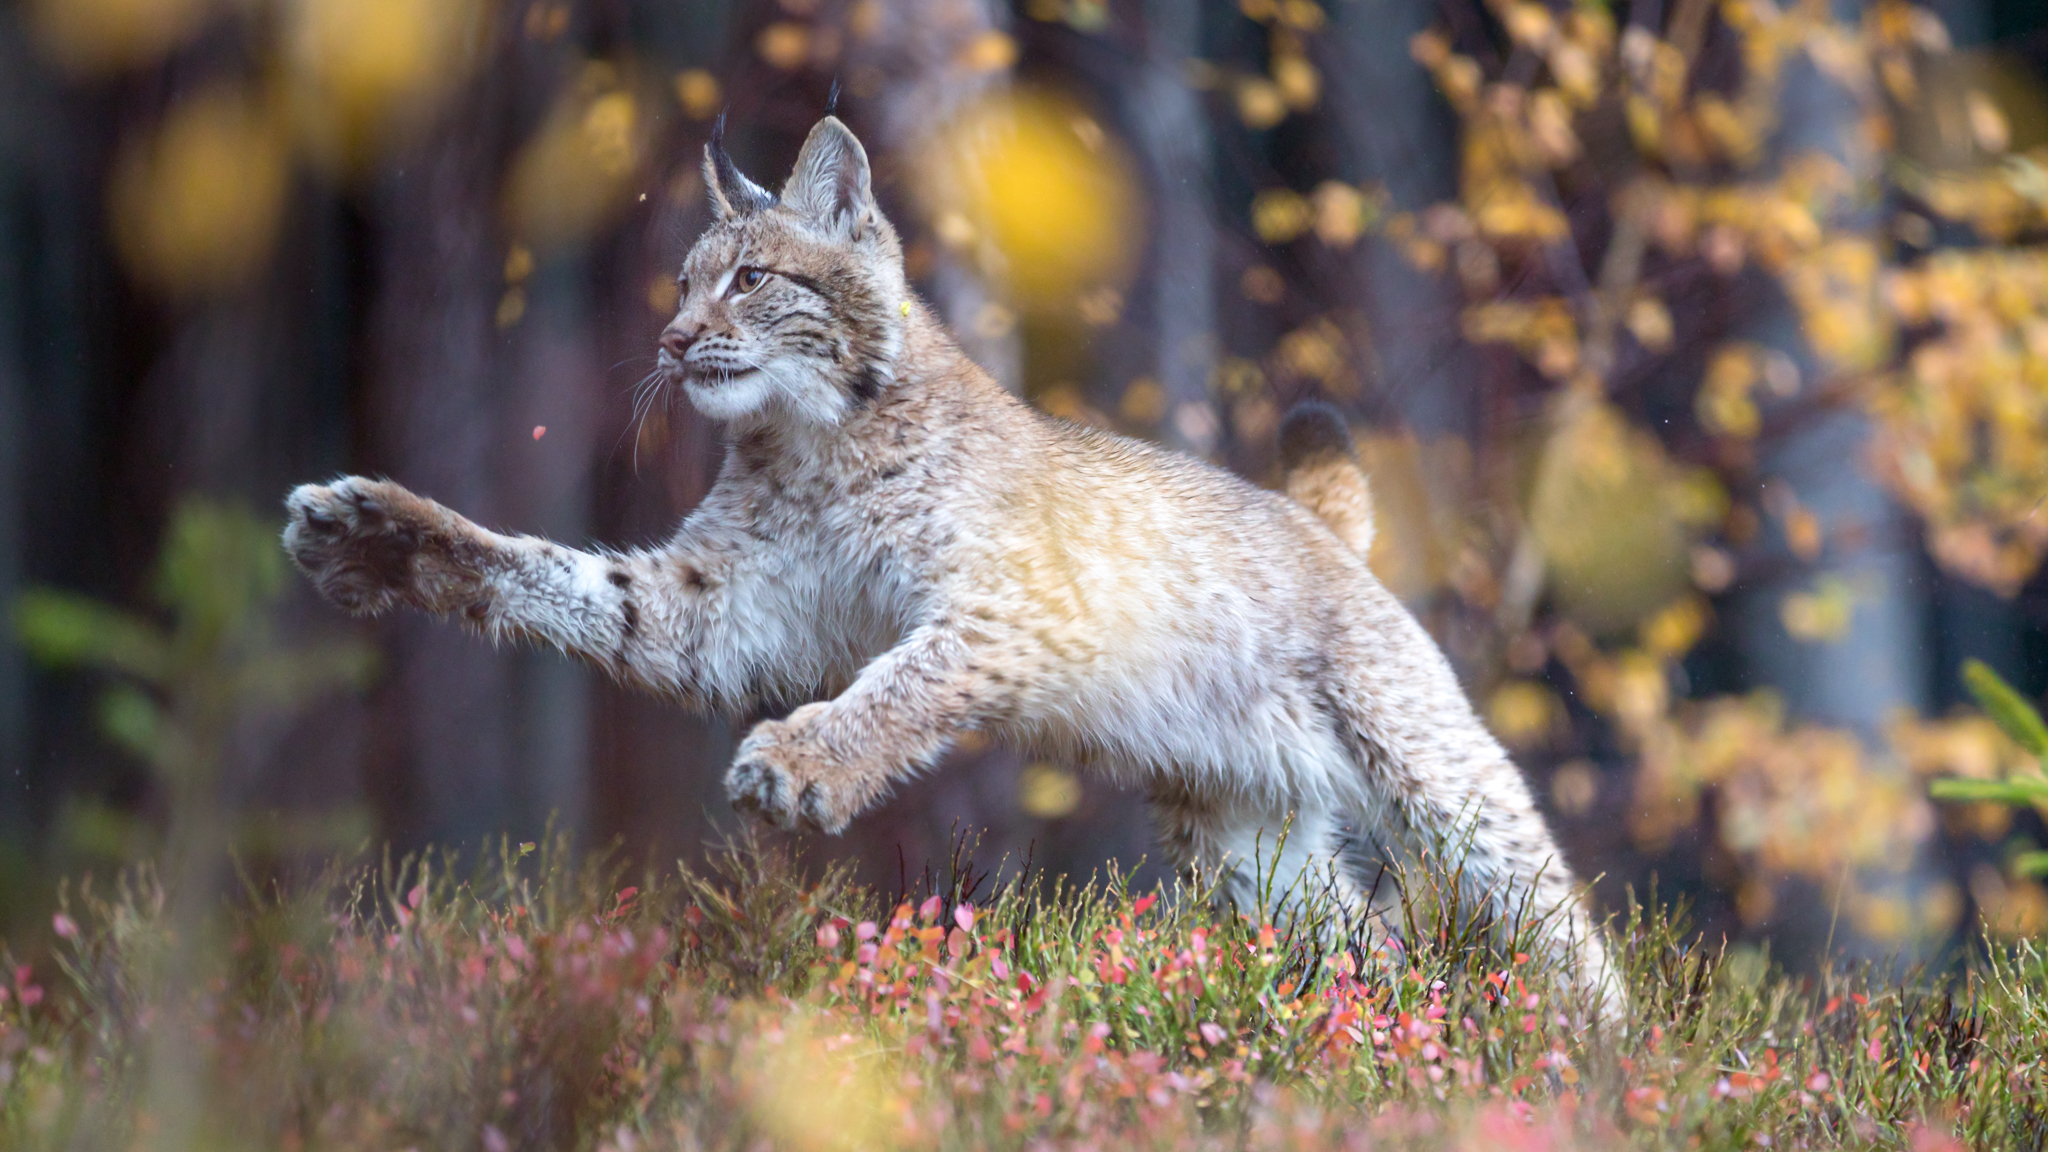 A young Lynx photographed from a very deep perspective. I shot through some yellow leaves to give the photo more depth.